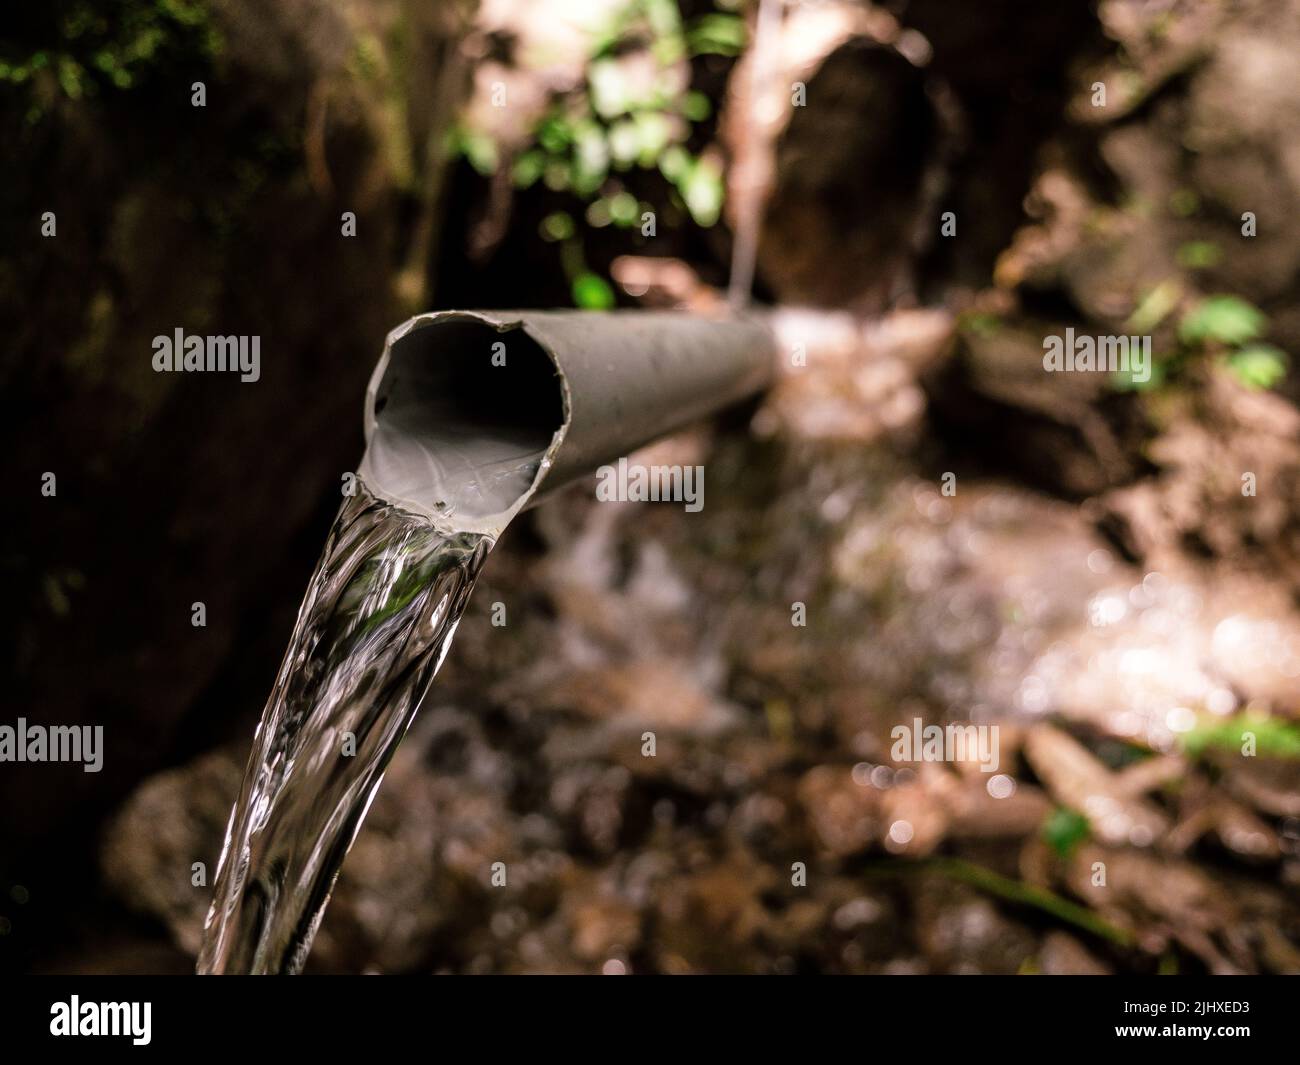 Clear stream water pouring from broken plastic pipe Stock Photo